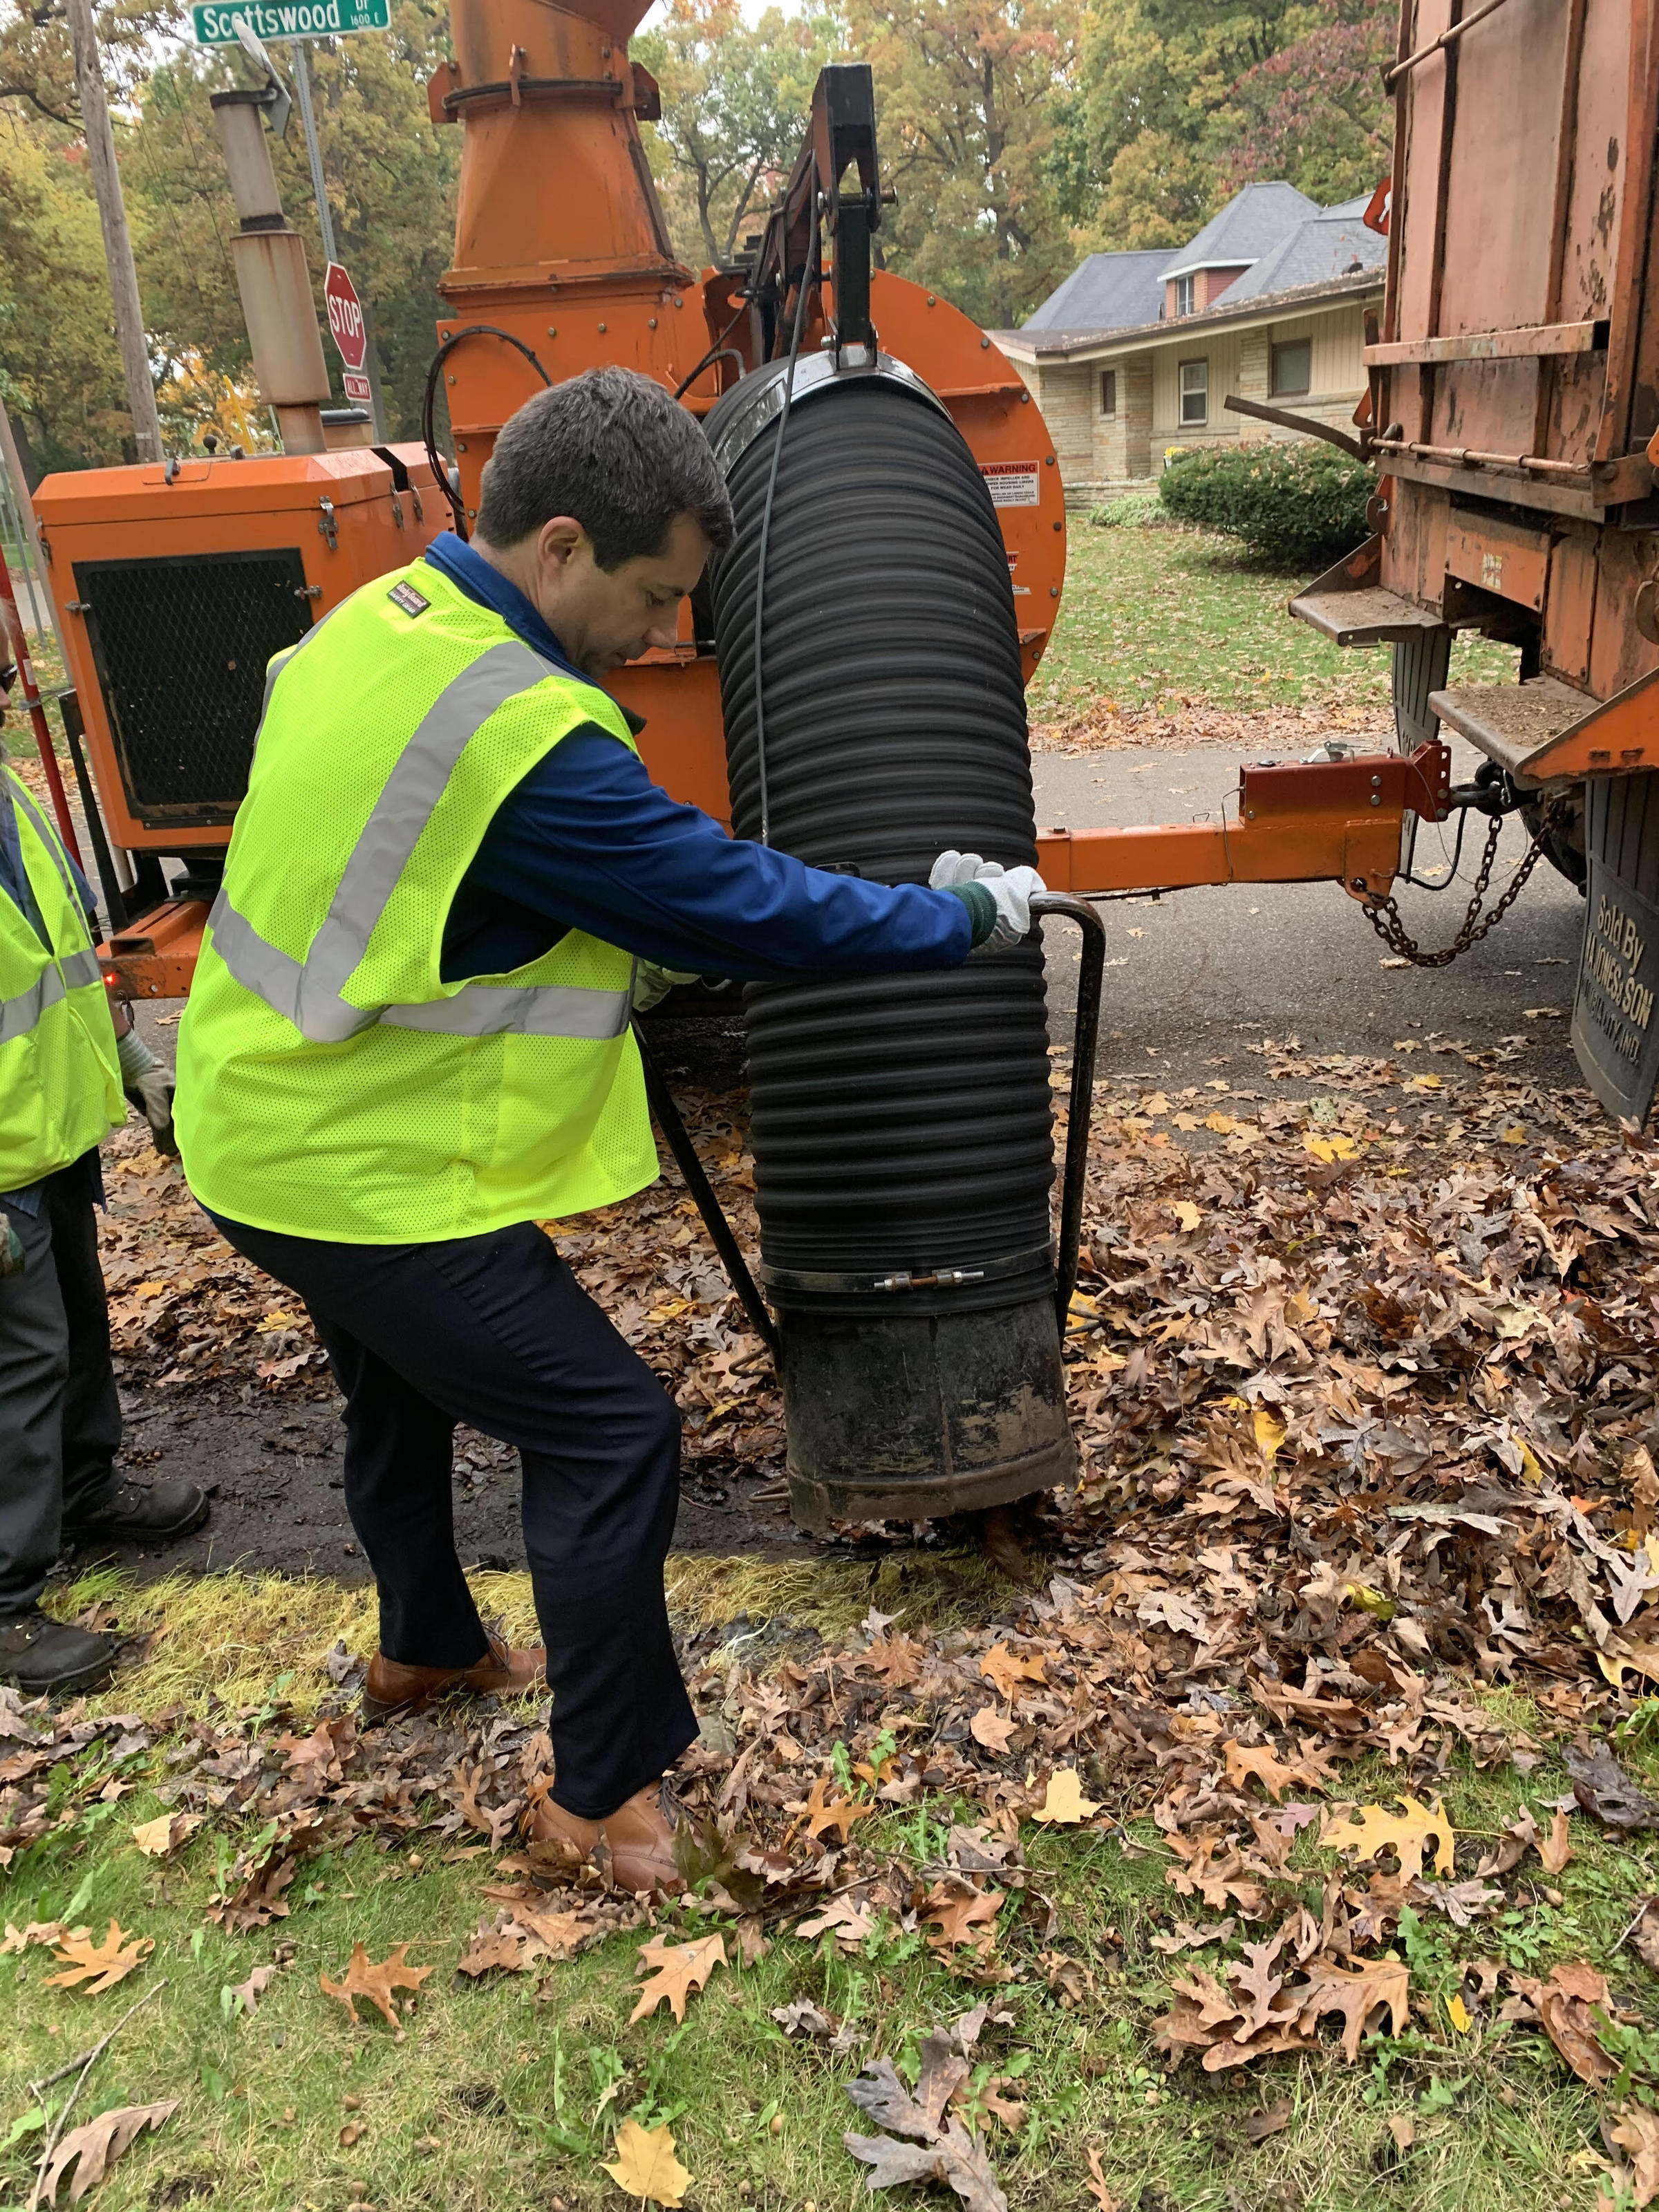 South Bend Using New Technology For Leaf Pickup Program WVPE